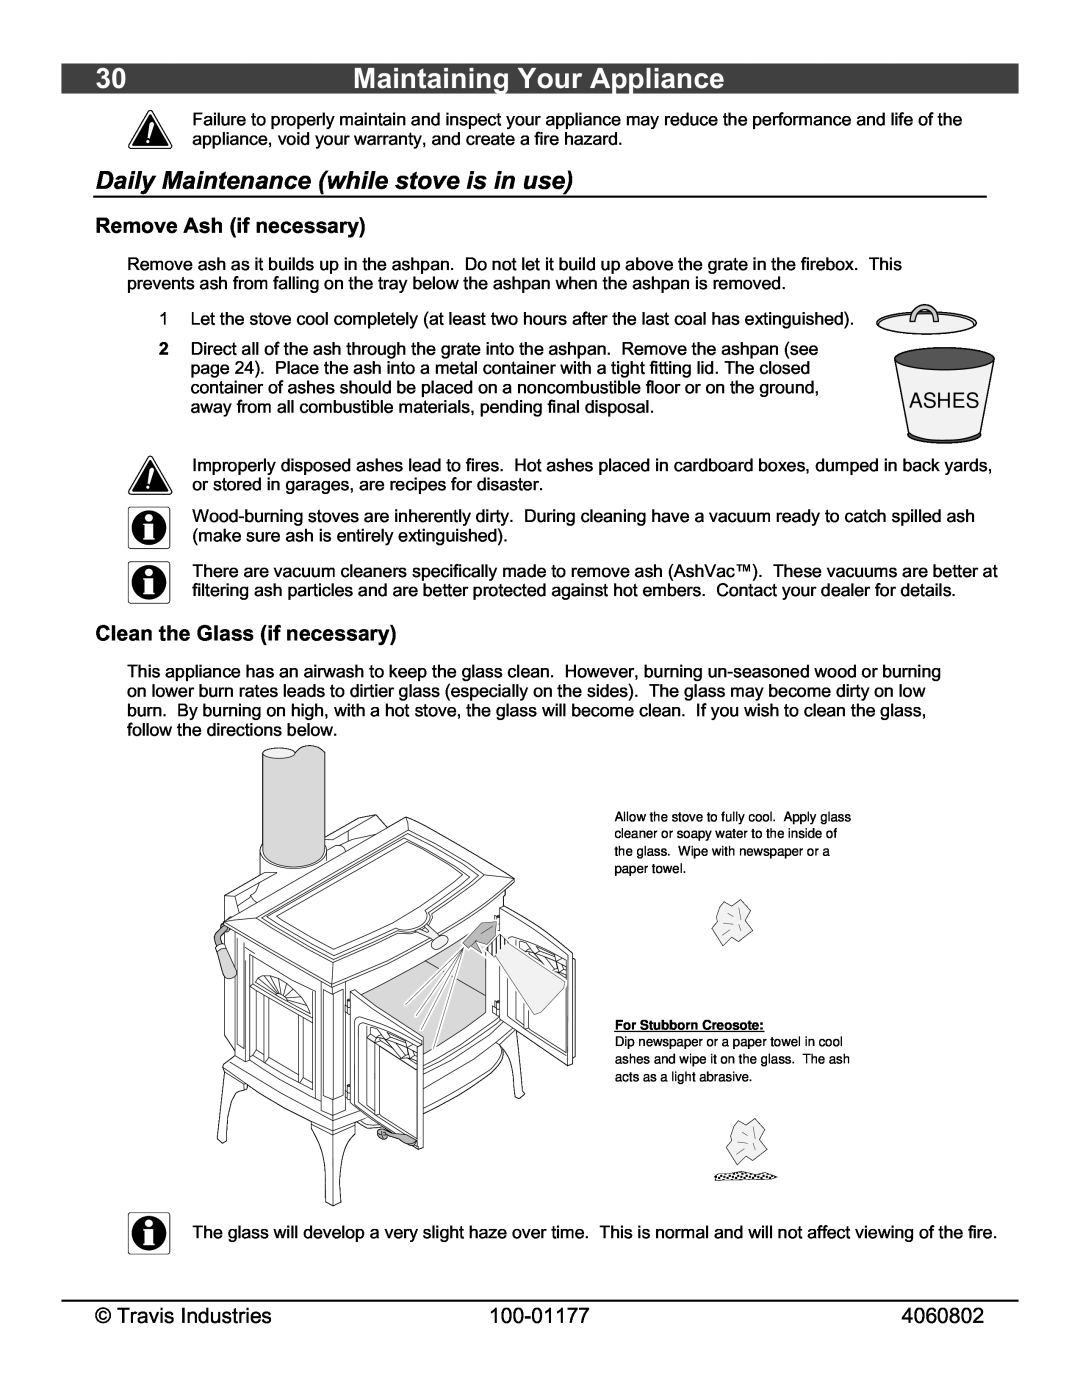 Lopi 028-S-75-2 owner manual Maintaining Your Appliance, Daily Maintenance while stove is in use, Remove Ash if necessary 